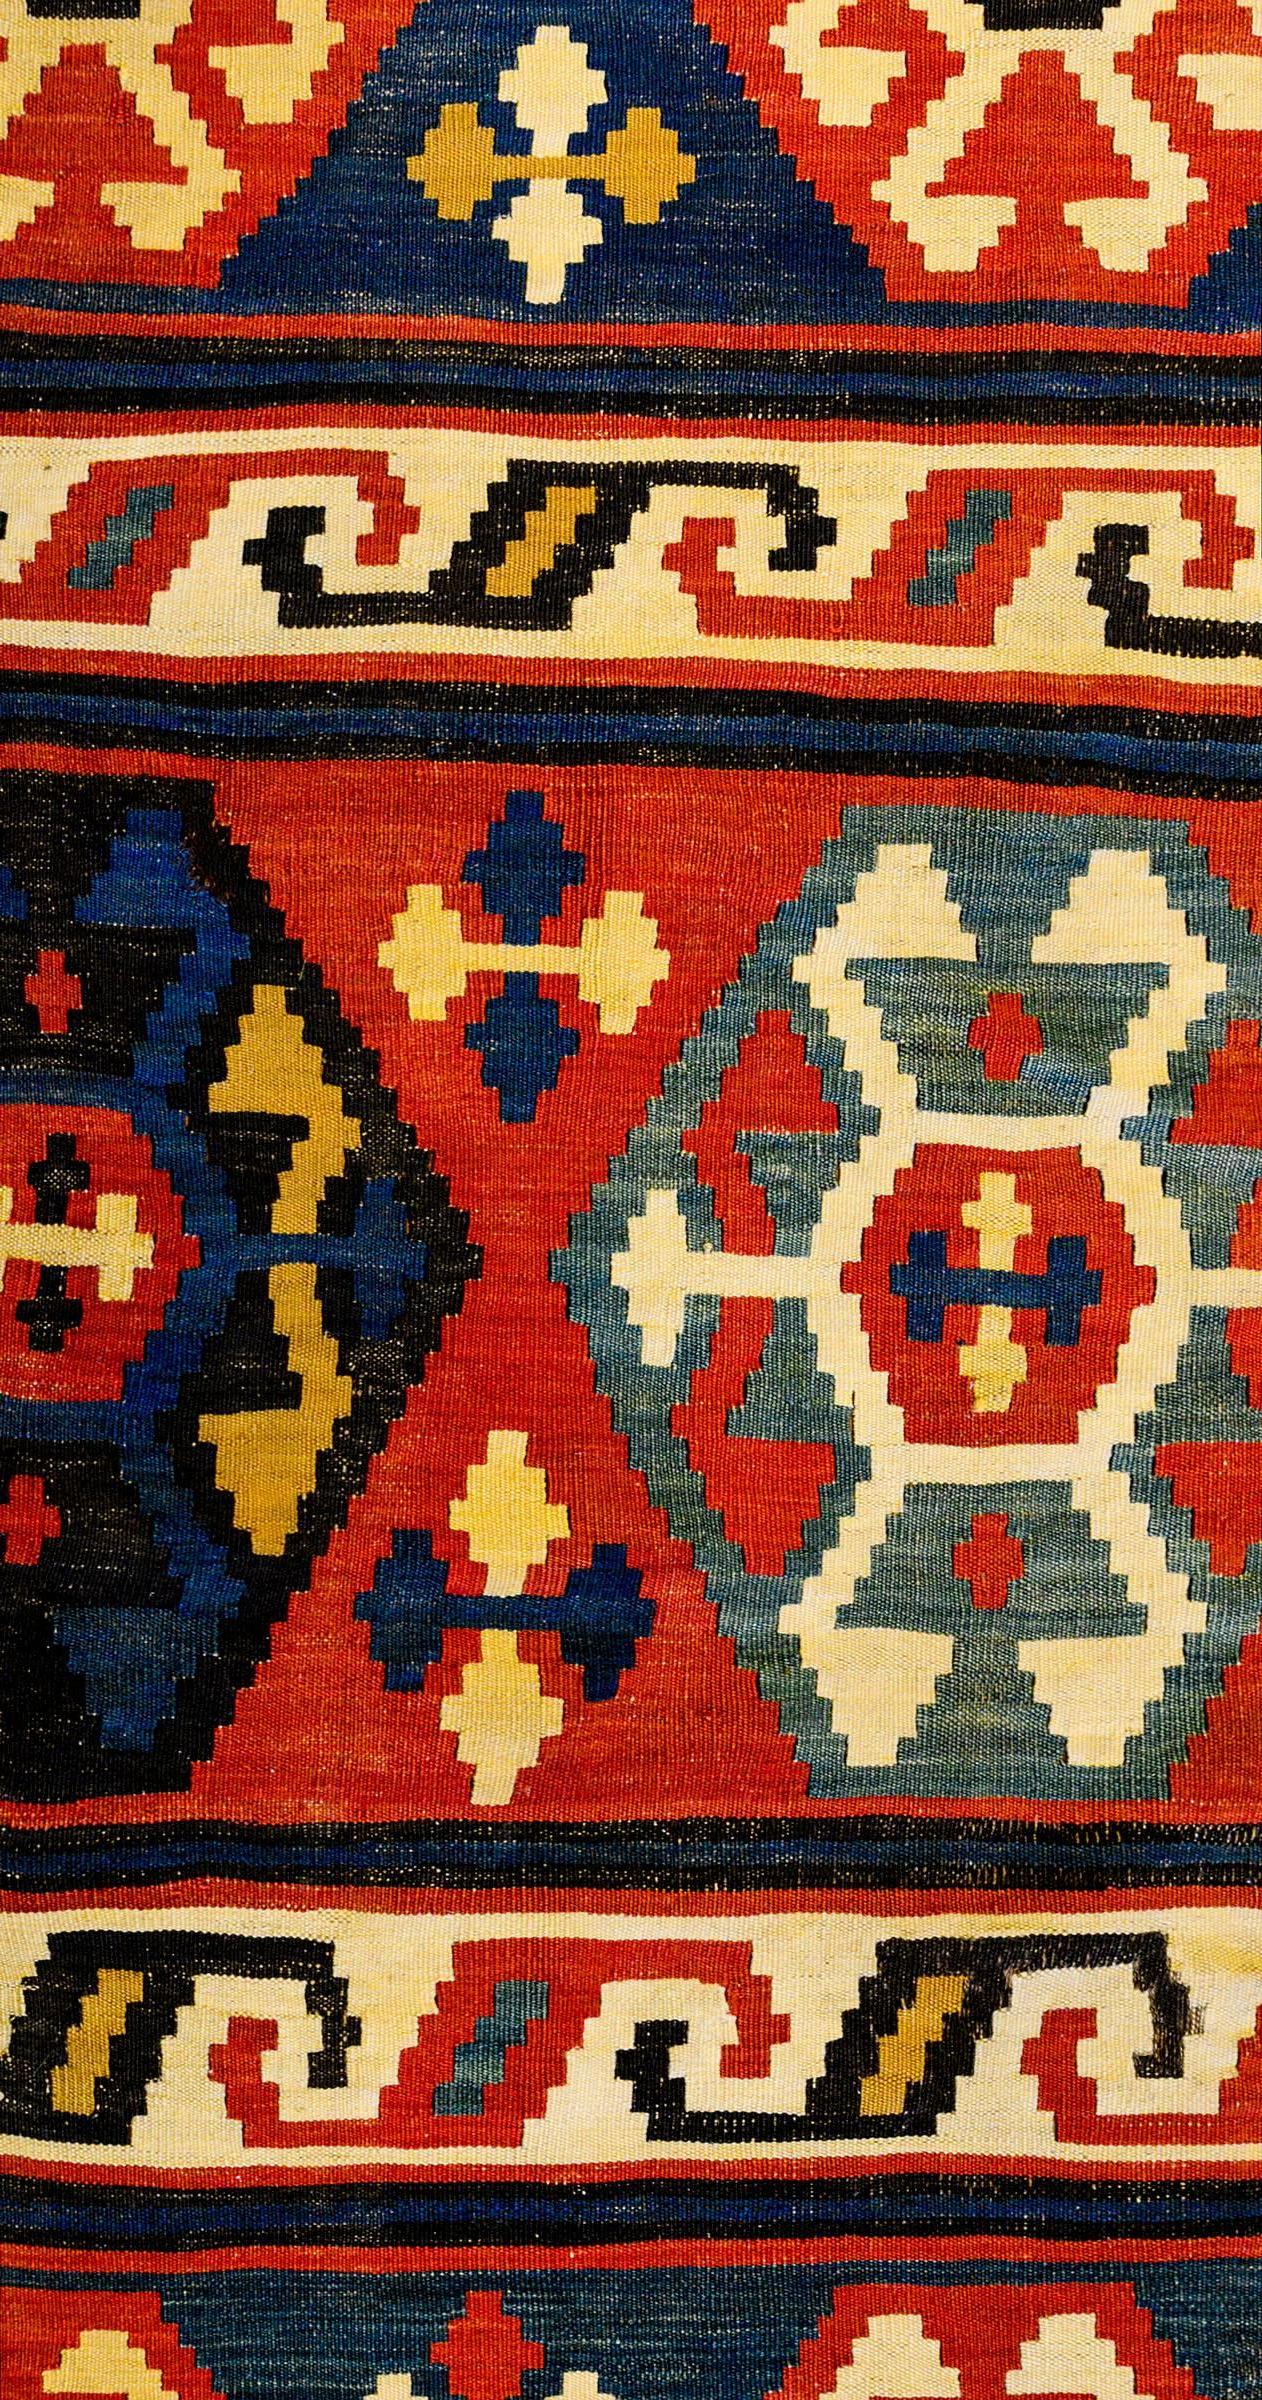 An exciting mid-20th century Caucasian Shriven Kilim rug with alternating stripes containing multicolored hexagonal shapes on crimson, indigo, and green backgrounds and S form shapes on white backgrounds.